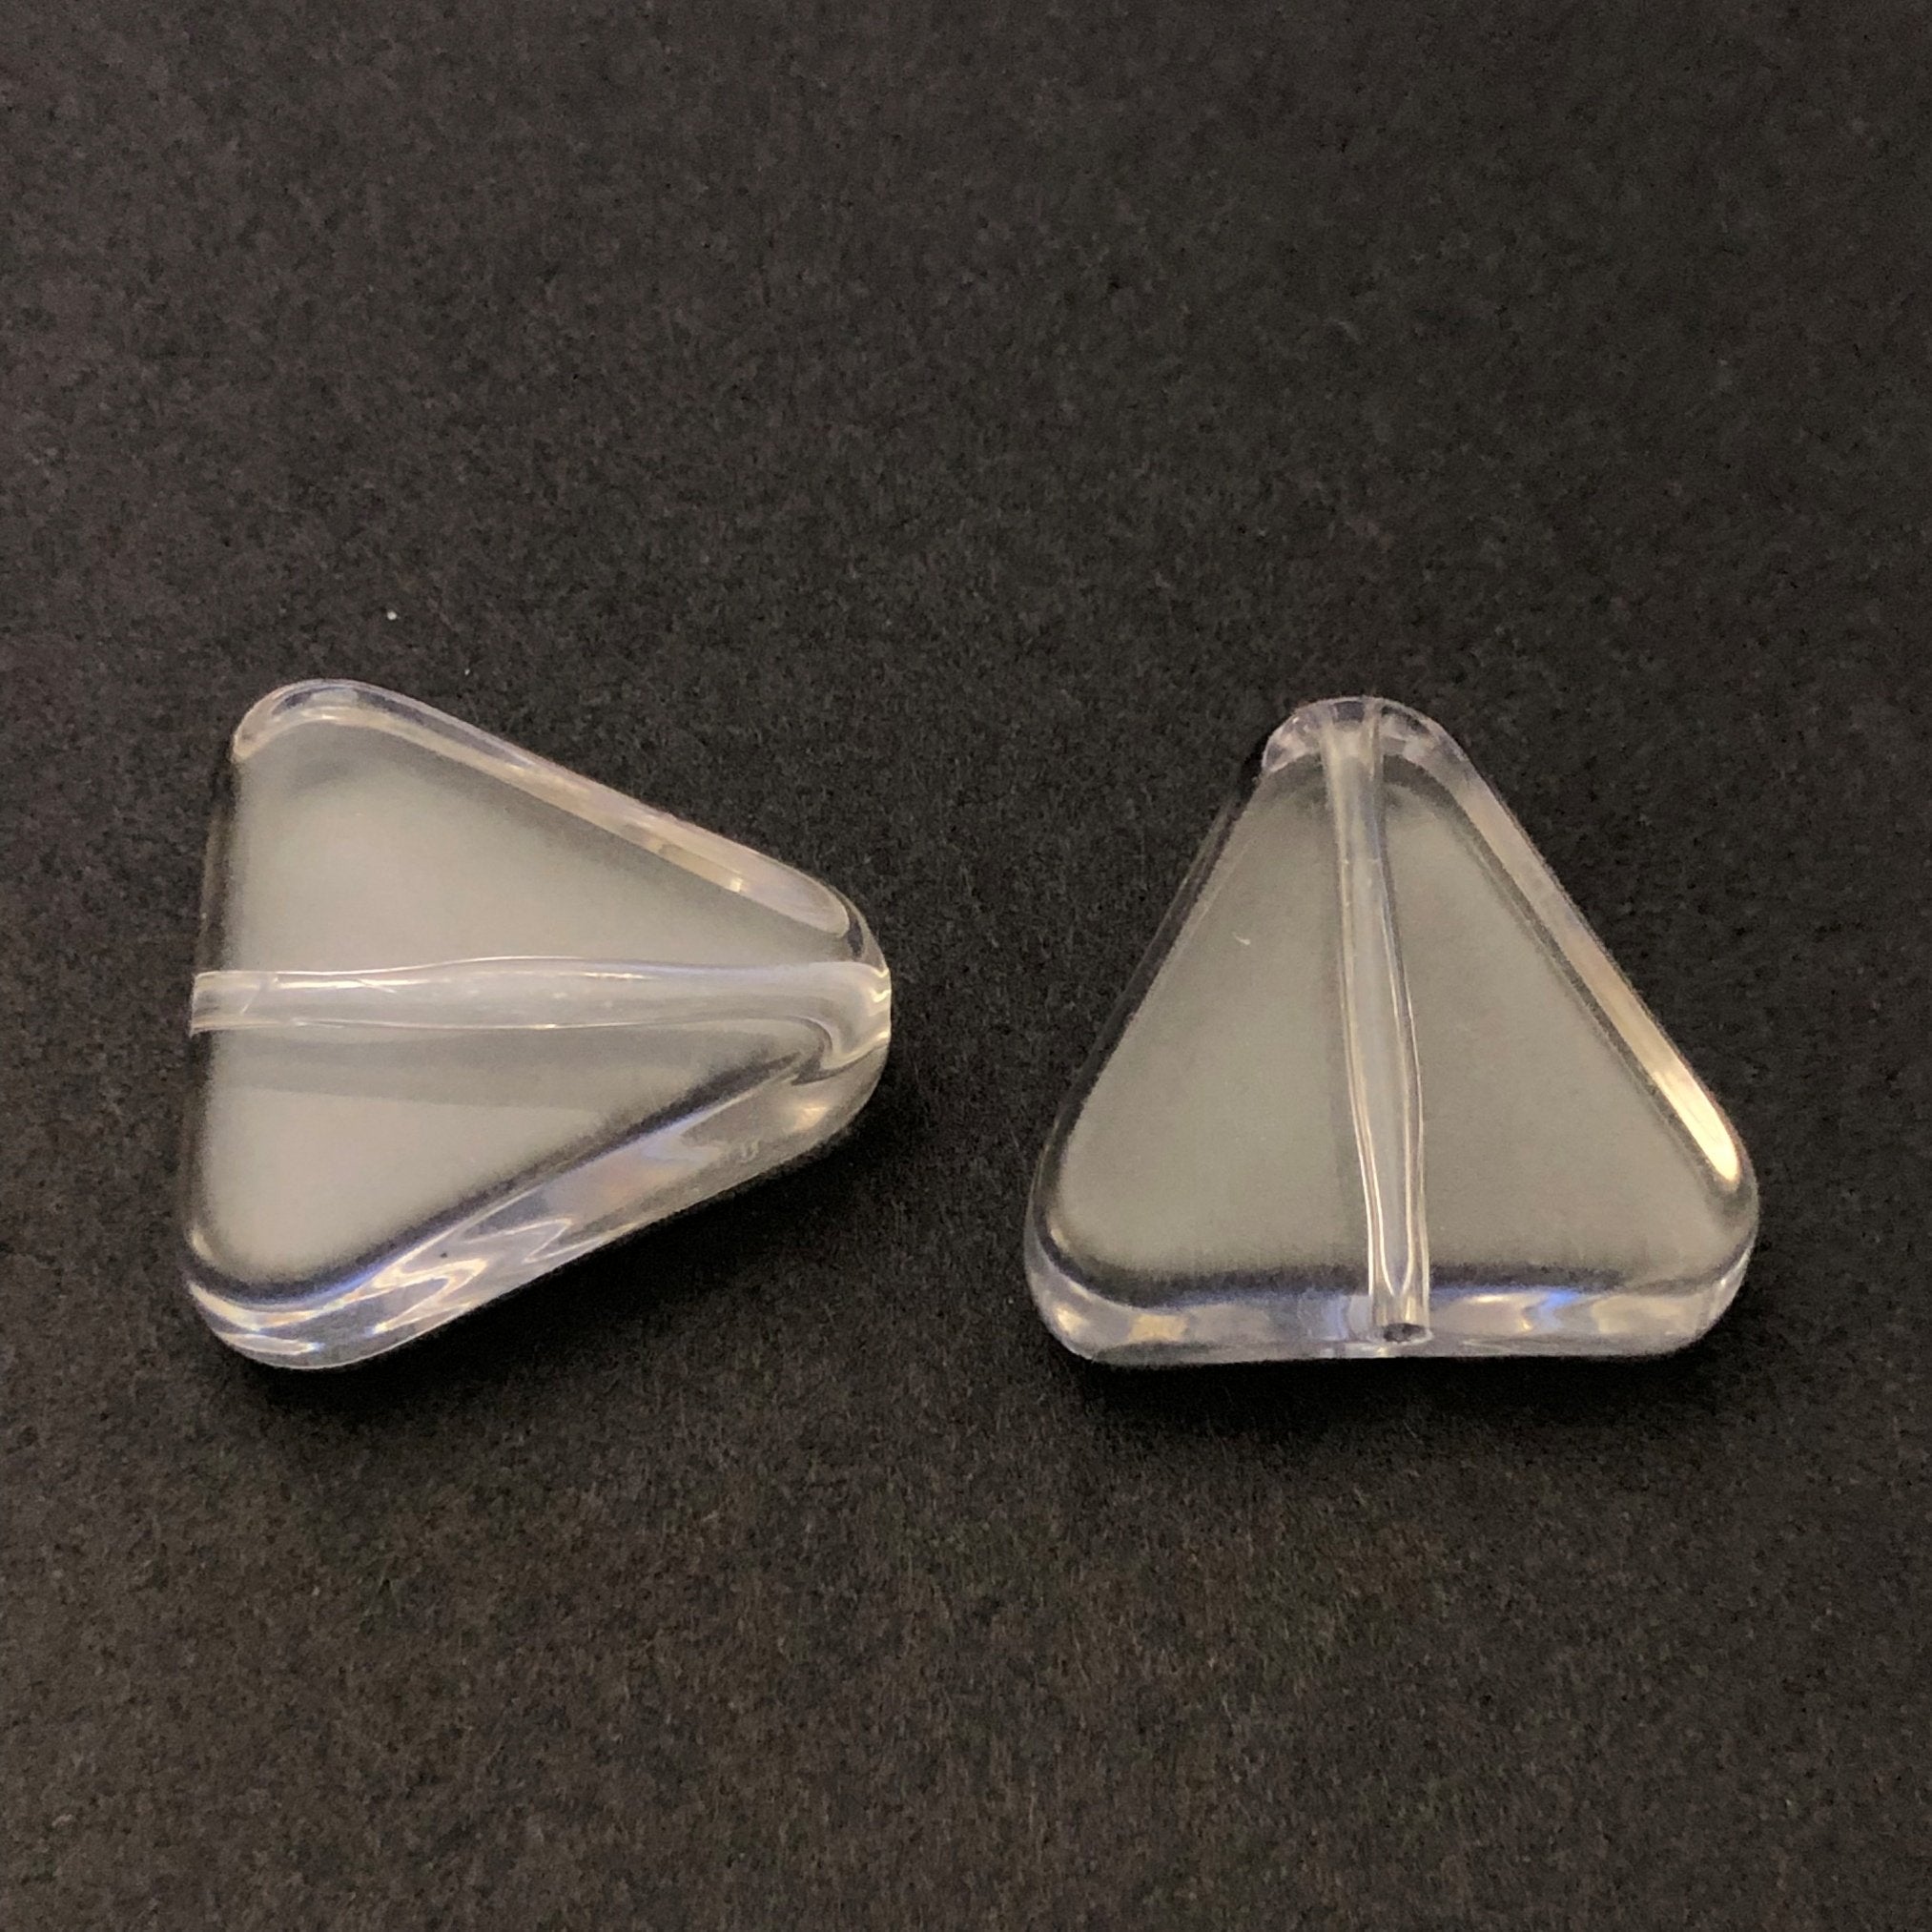 22MM Crystal Triangle Bead (36 pieces)